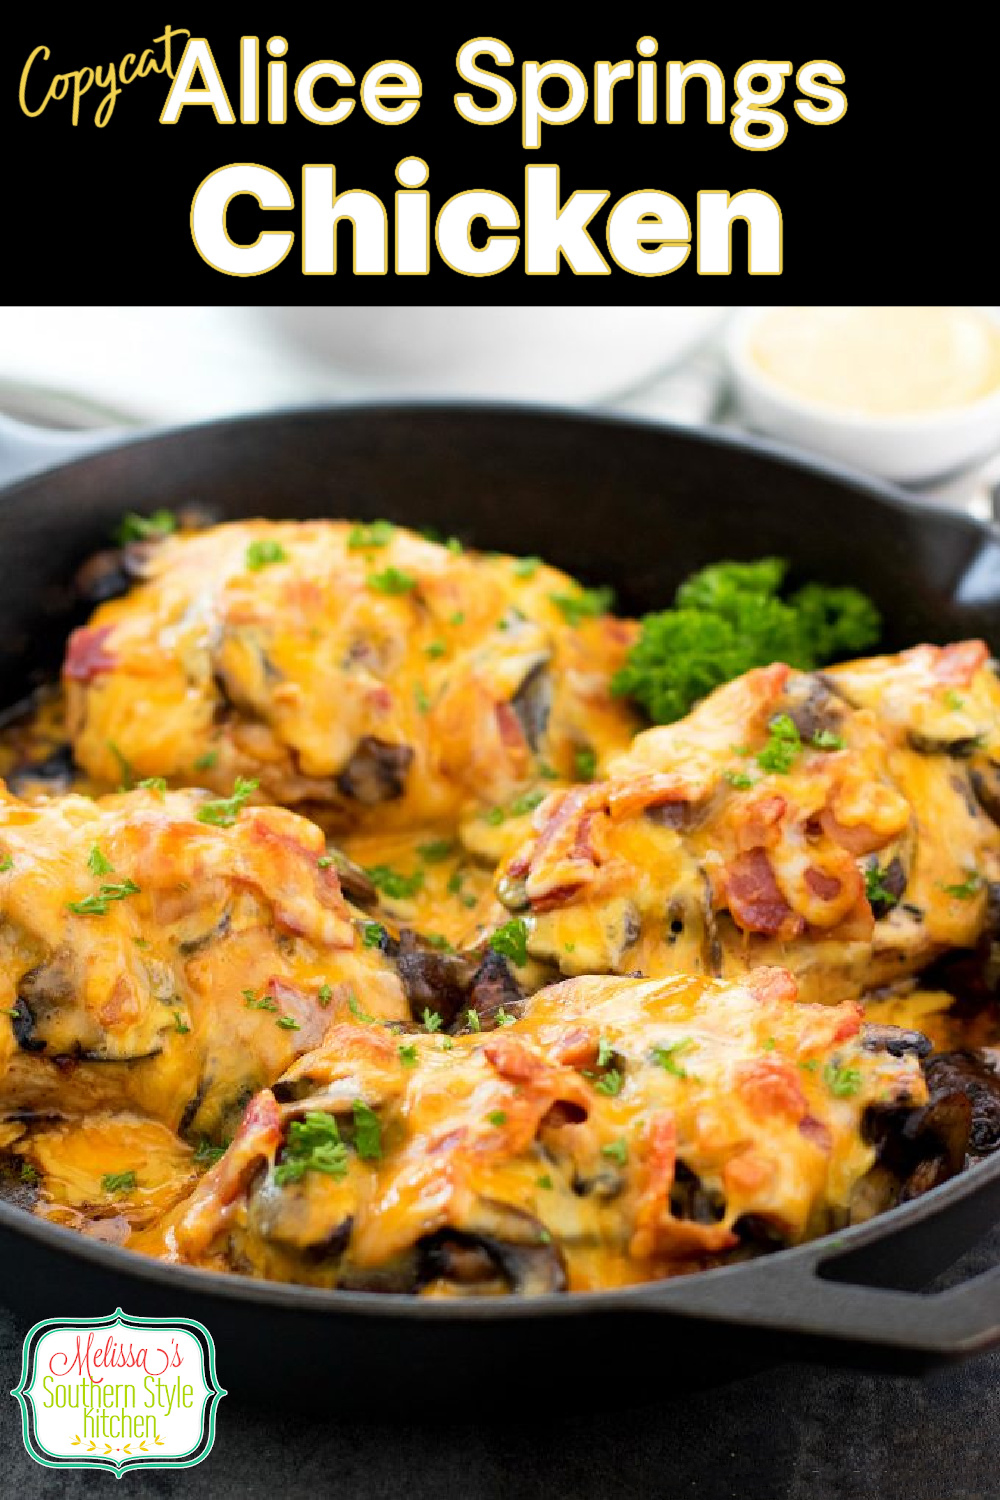 This better-than-copycat Alice Springs Chicken will have you dining on a restaurant favorite at your own kitchen table #alicespringschicken #copycatrecipes #easychickenbreastrecipes #poultry #chickenrecipes #dinner #dinnerideas #honeymustard #copycatalicespringschicken #mushrooms #southernfood #southernrecipes